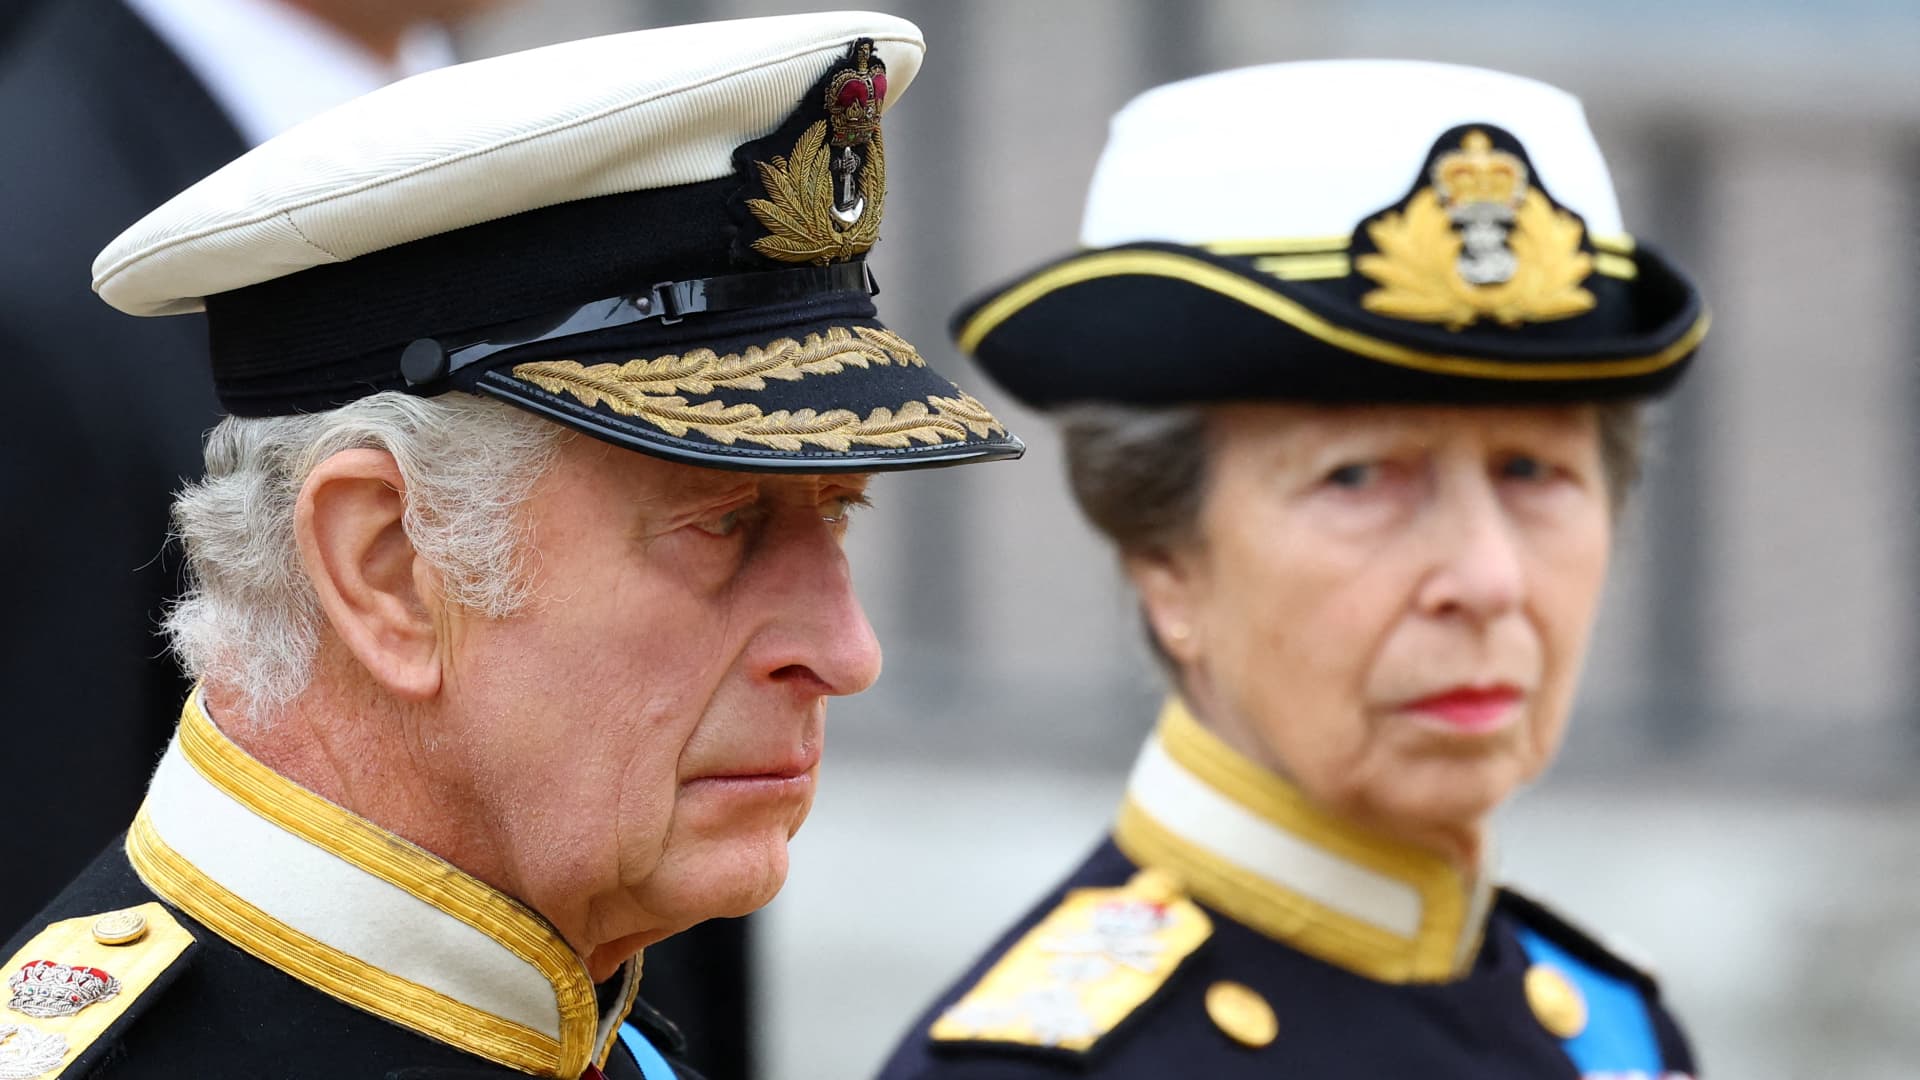 Britain's King Charles III and his sister Britain's Princess Anne, Princess Royal arrives to take their seats inside Westminster Abbey in London on September 19, 2022, for the State Funeral Service for Britain's Queen Elizabeth II.